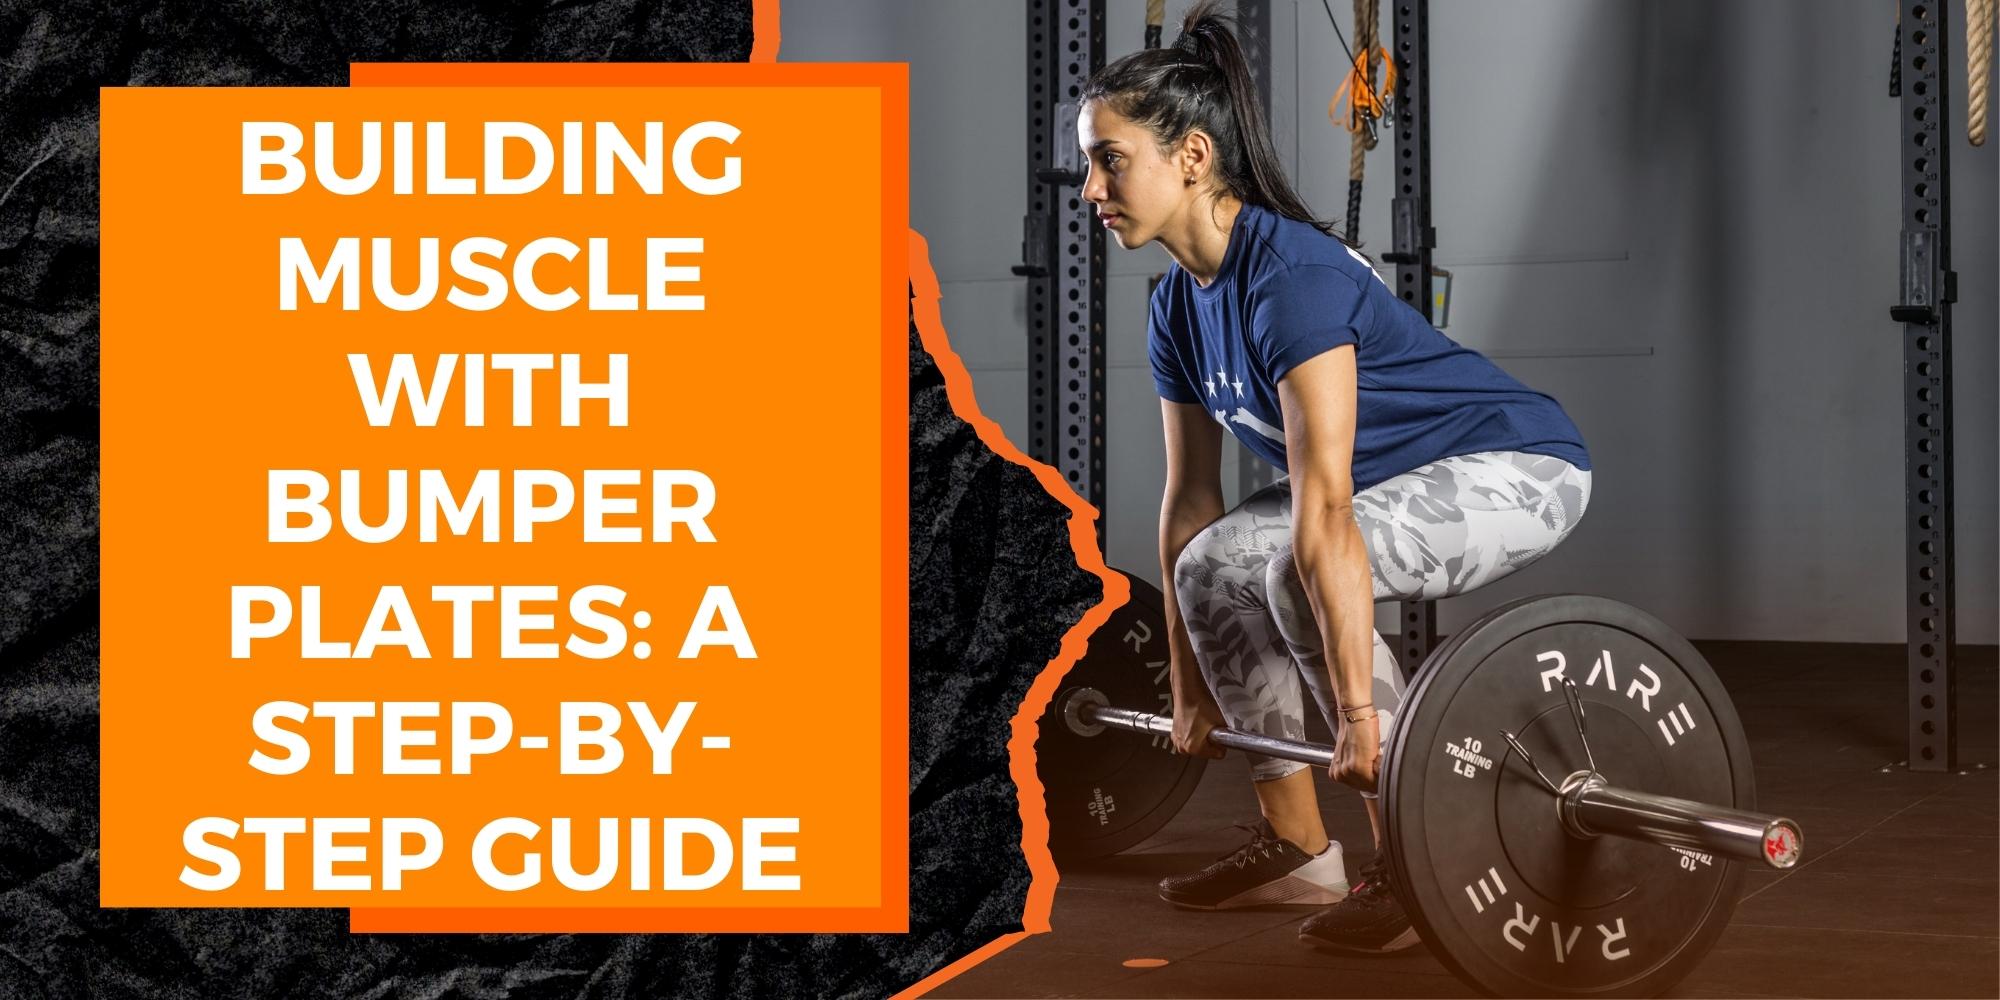 Building Muscle with Bumper Plates: A Step-by-Step Guide